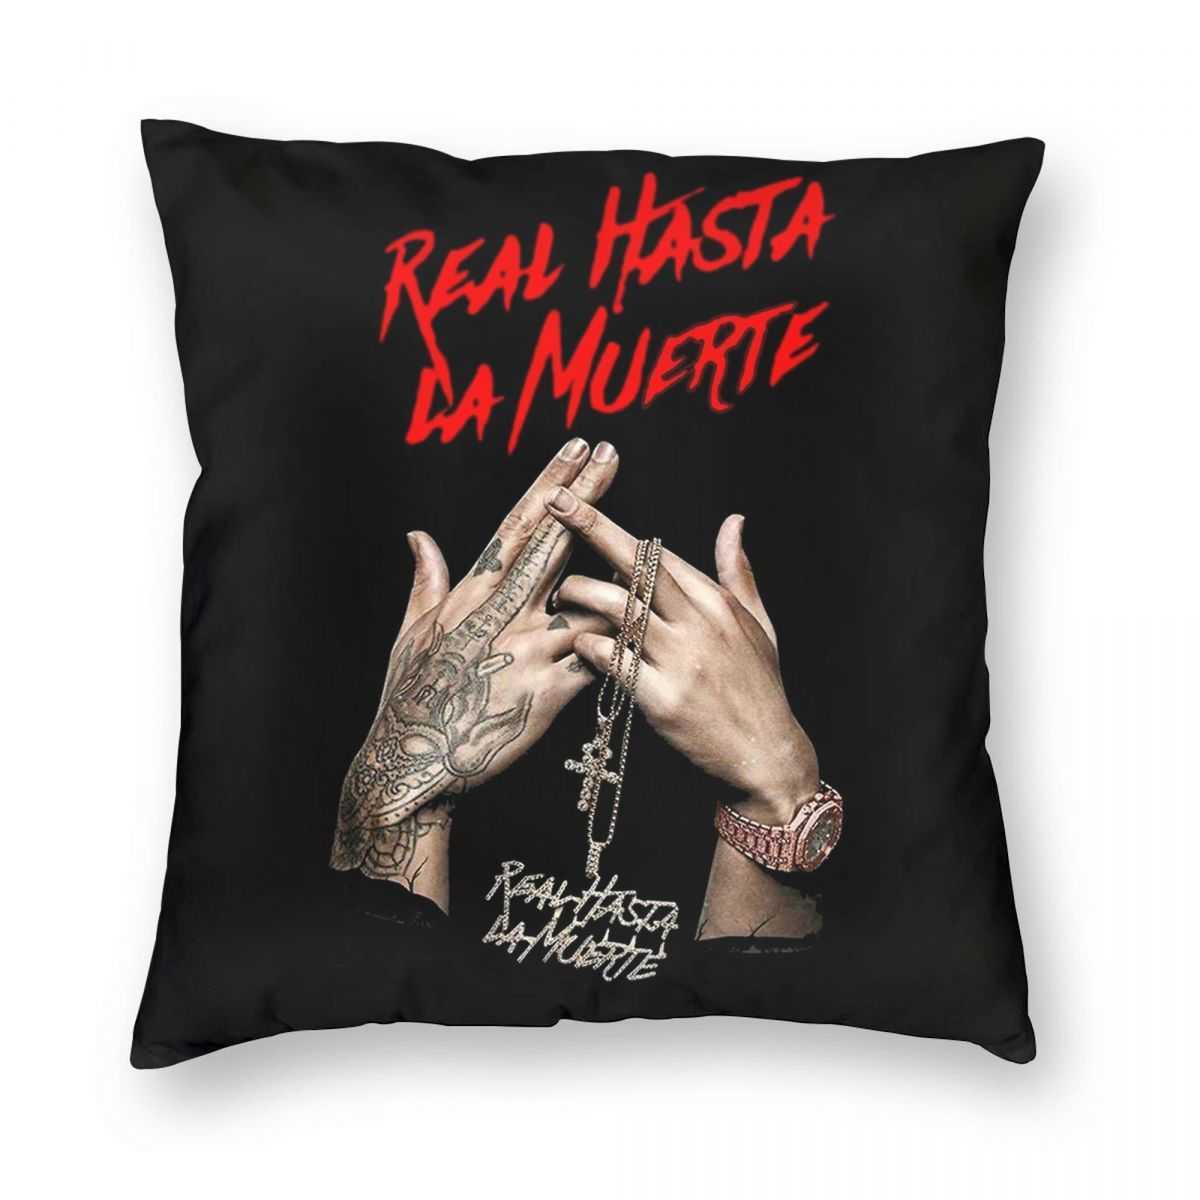 Pillow Case Anuel AA Real Hasta La Muerte case Polyester Linen Printed Decor Throw Case Room Cushion Cover Wholesale HKD230817